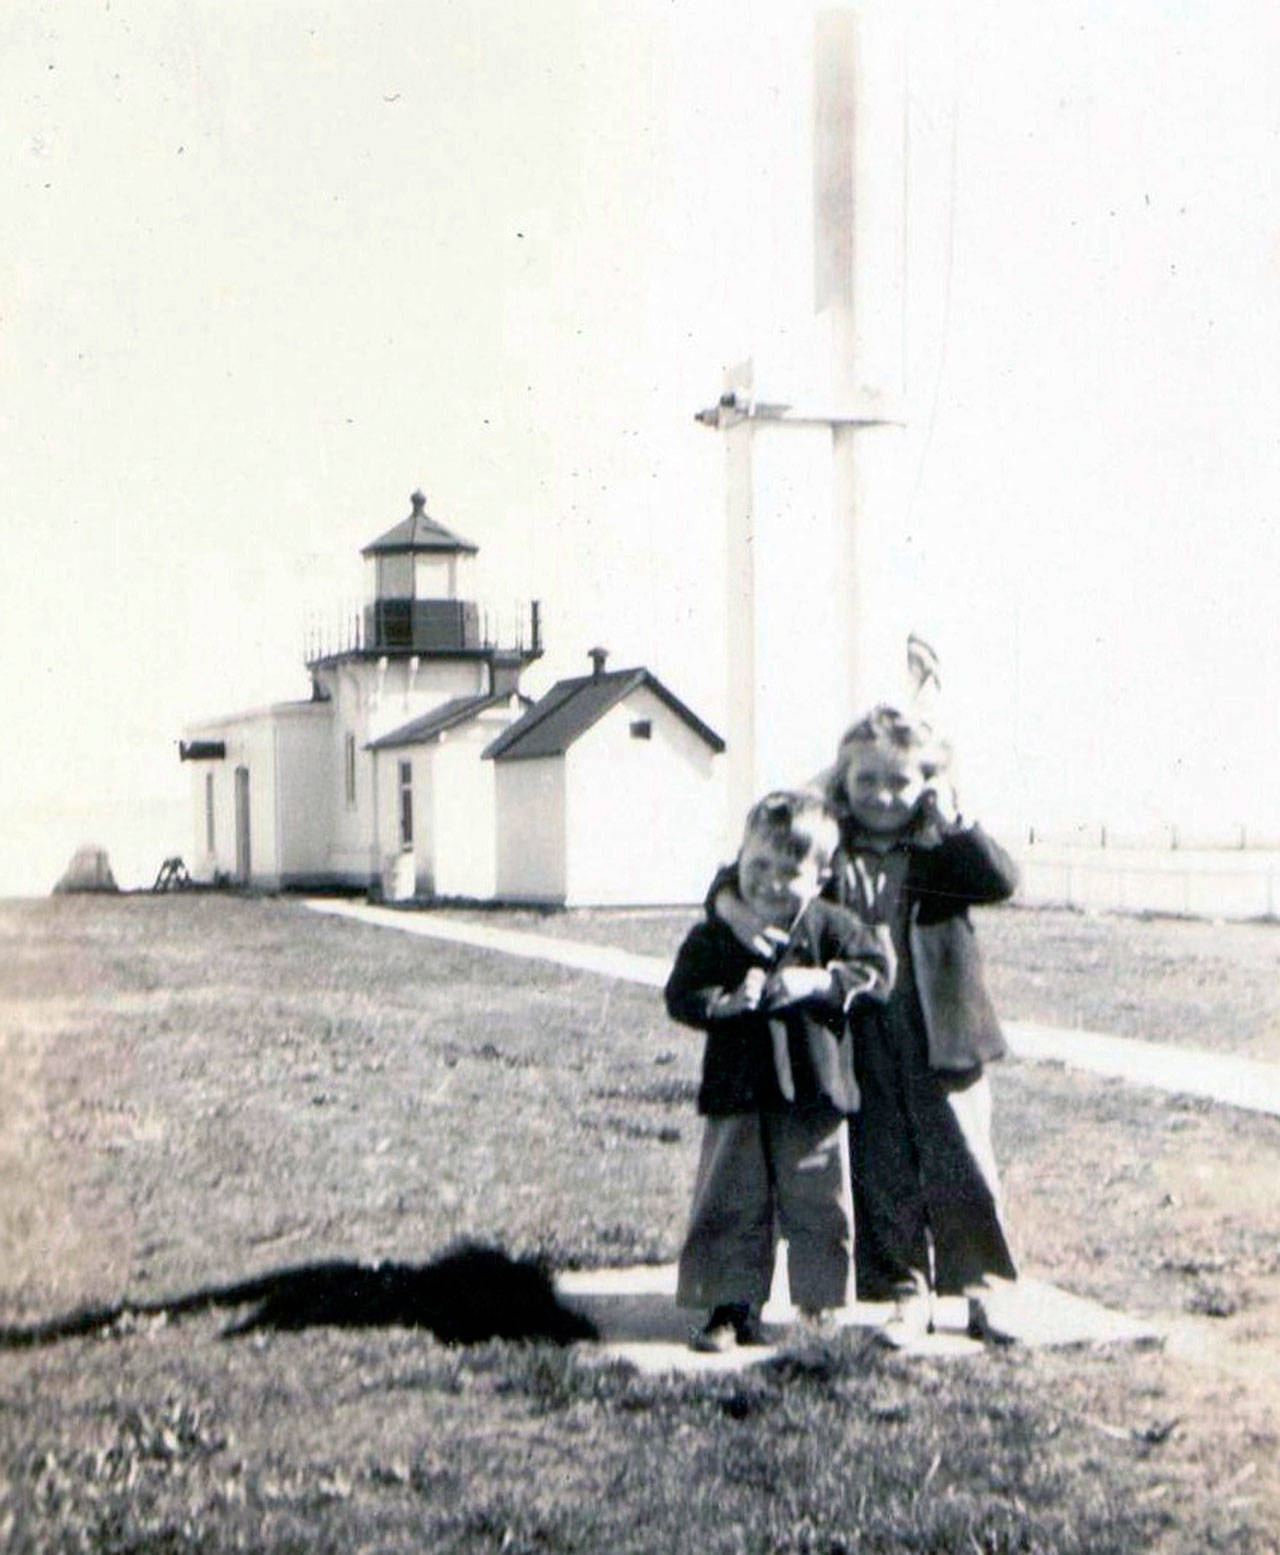 This North Kitsap promotory has been known by different names: hahdskus, Point No Point, and Point No Point Light Station. But for generations of people, it’s also been known as home. (U.S. Lighthouse Society)                                 This North Kitsap promotory has been known by different names: hahdskus, Point No Point, and Point No Point Light Station. But for generations of people, it’s also been known as home. (U.S. Lighthouse Society)